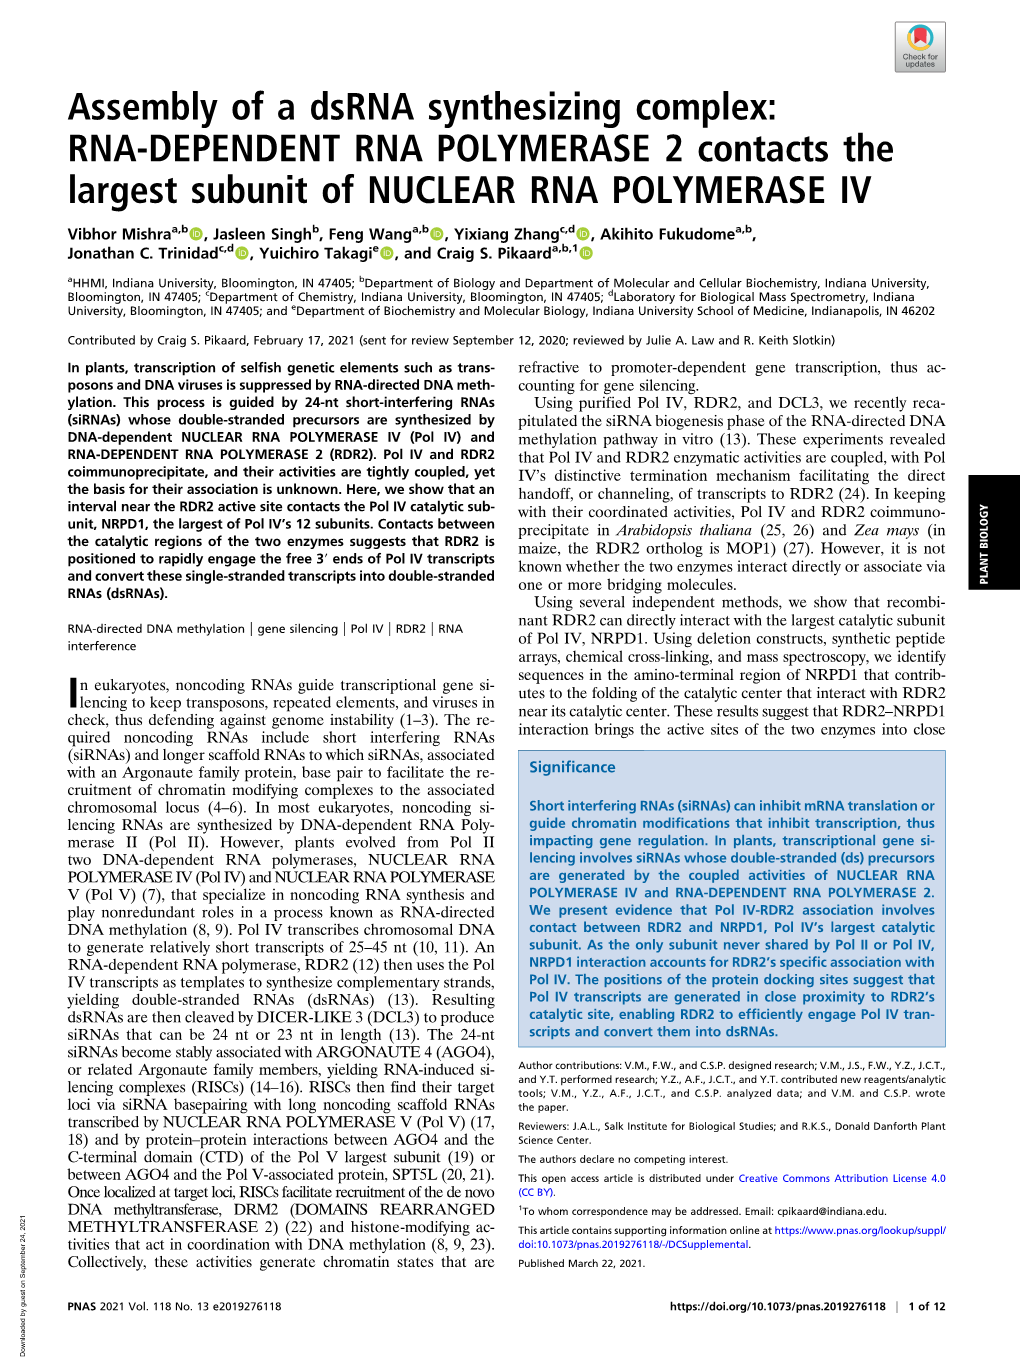 Assembly of a Dsrna Synthesizing Complex: RNA-DEPENDENT RNA POLYMERASE 2 Contacts the Largest Subunit of NUCLEAR RNA POLYMERASE IV